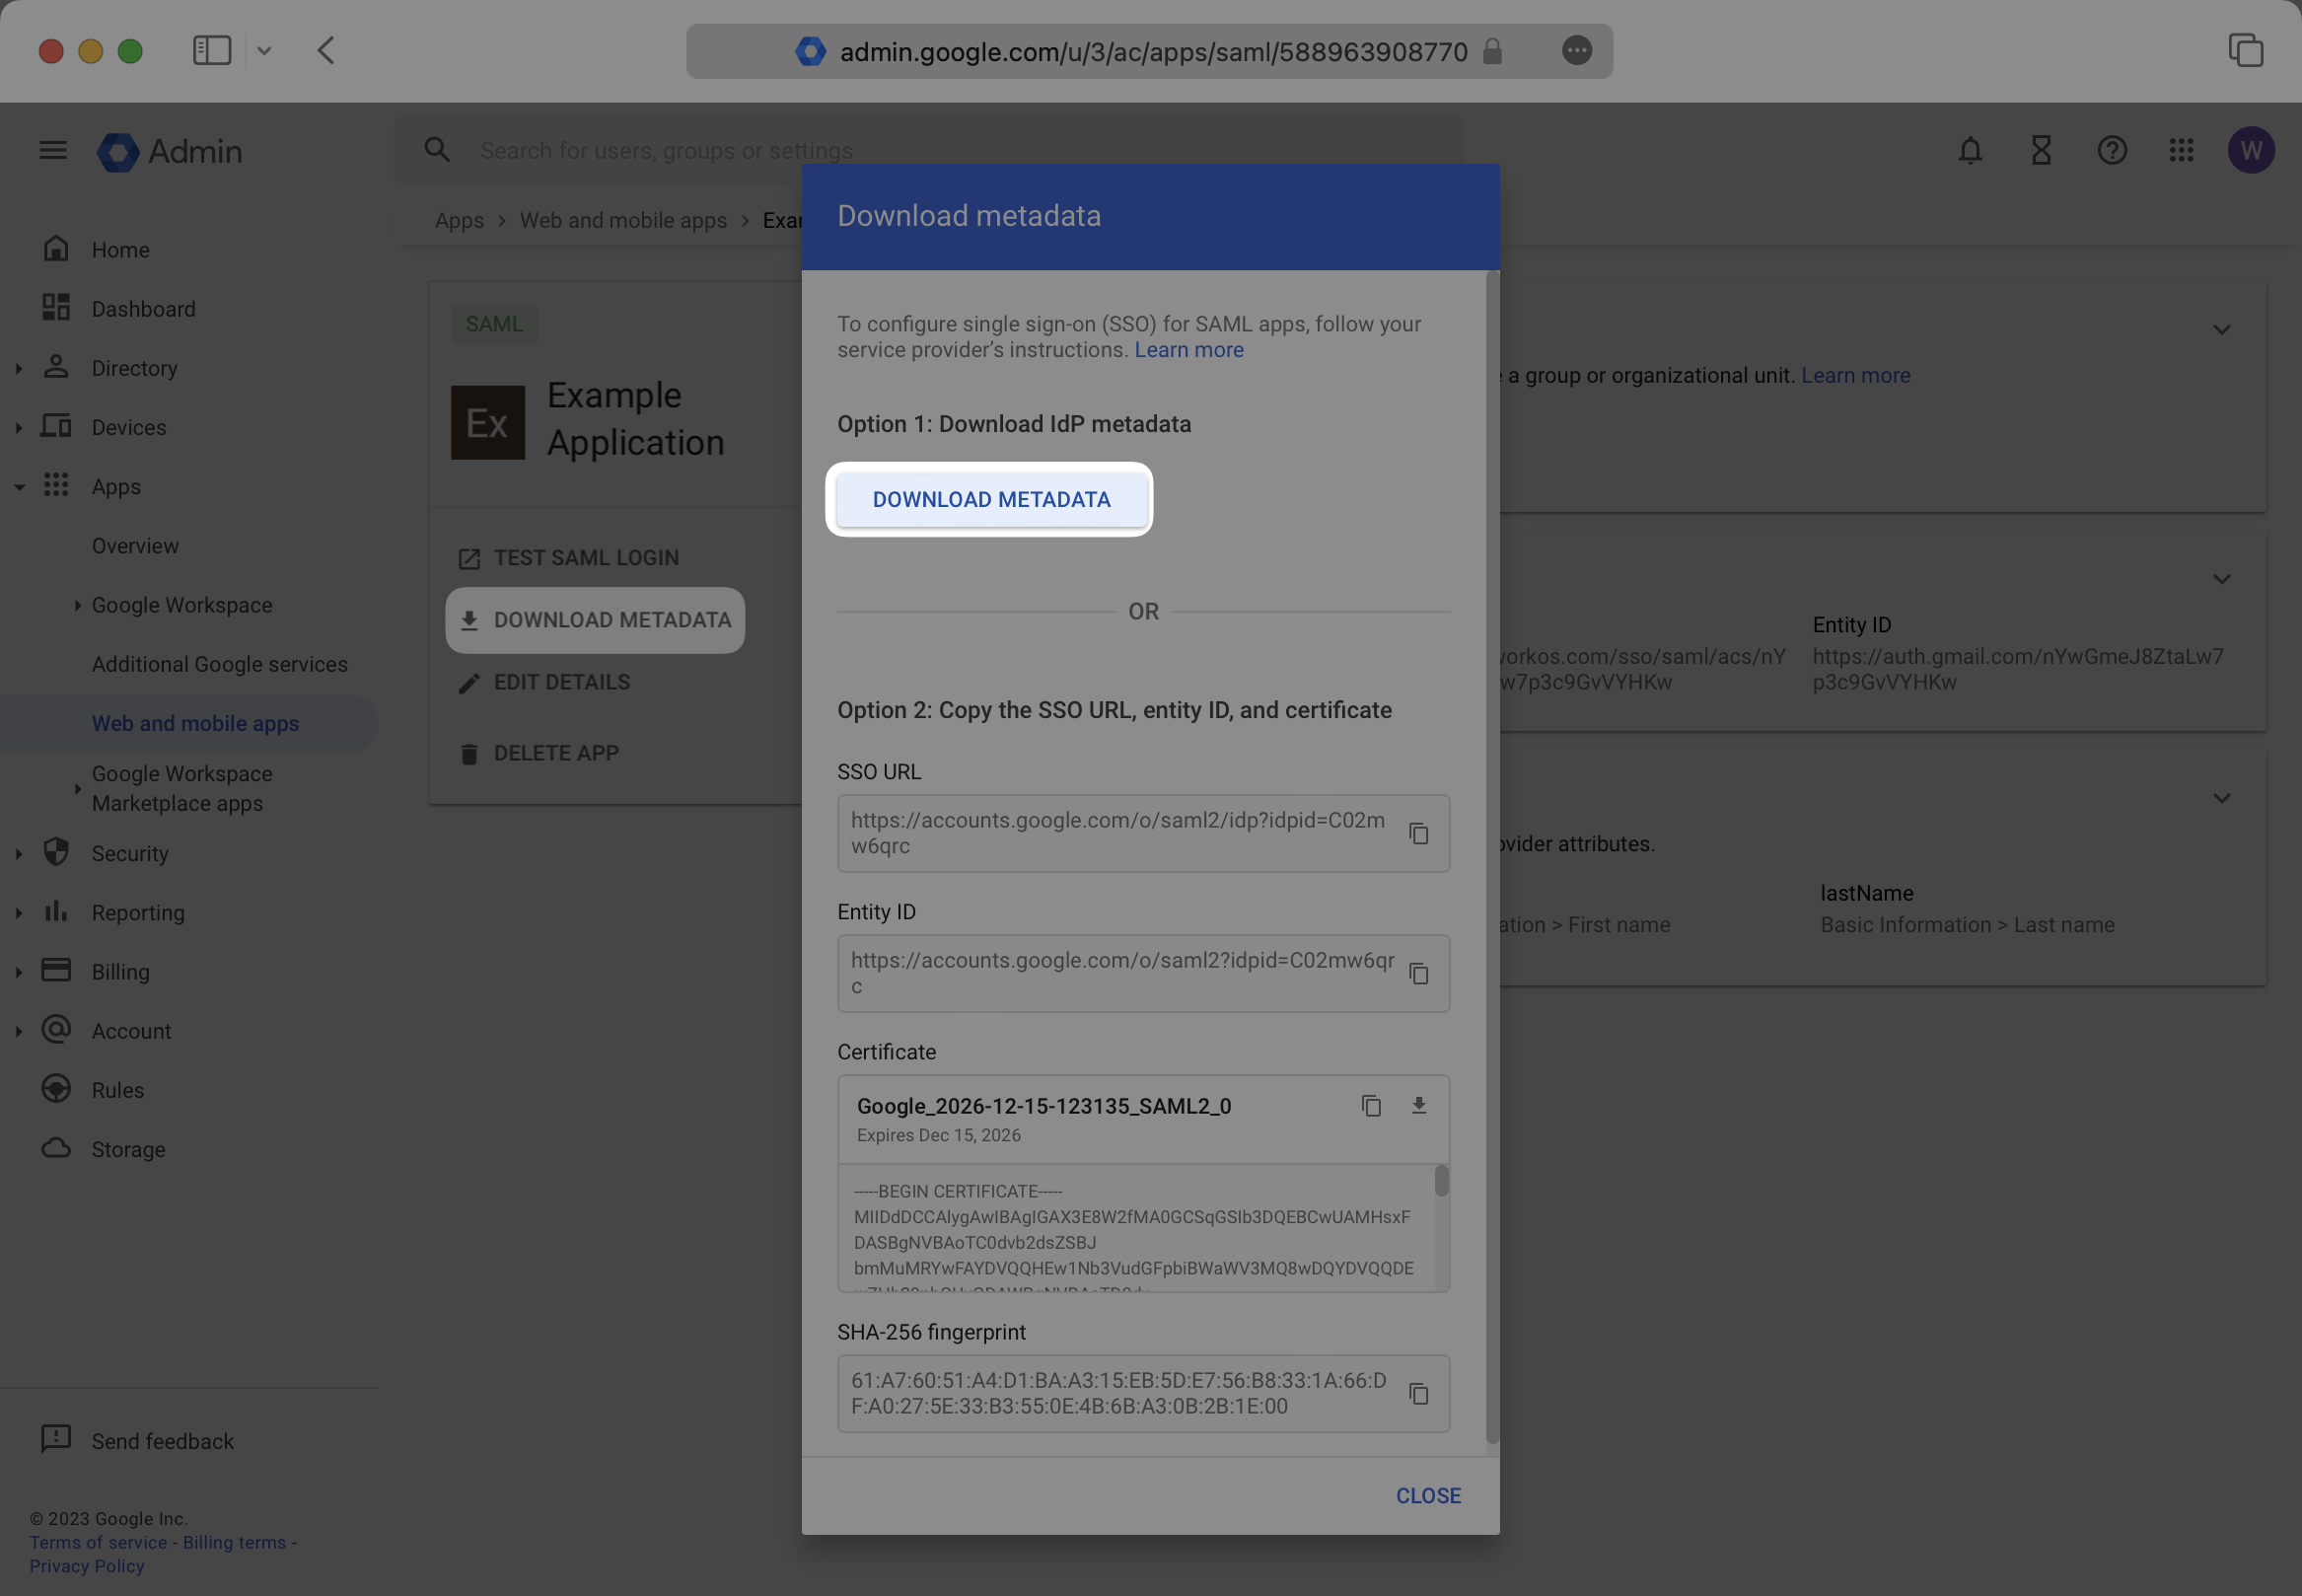 A screenshot showing where to find "Download Metadata" in the Google Dashboard.